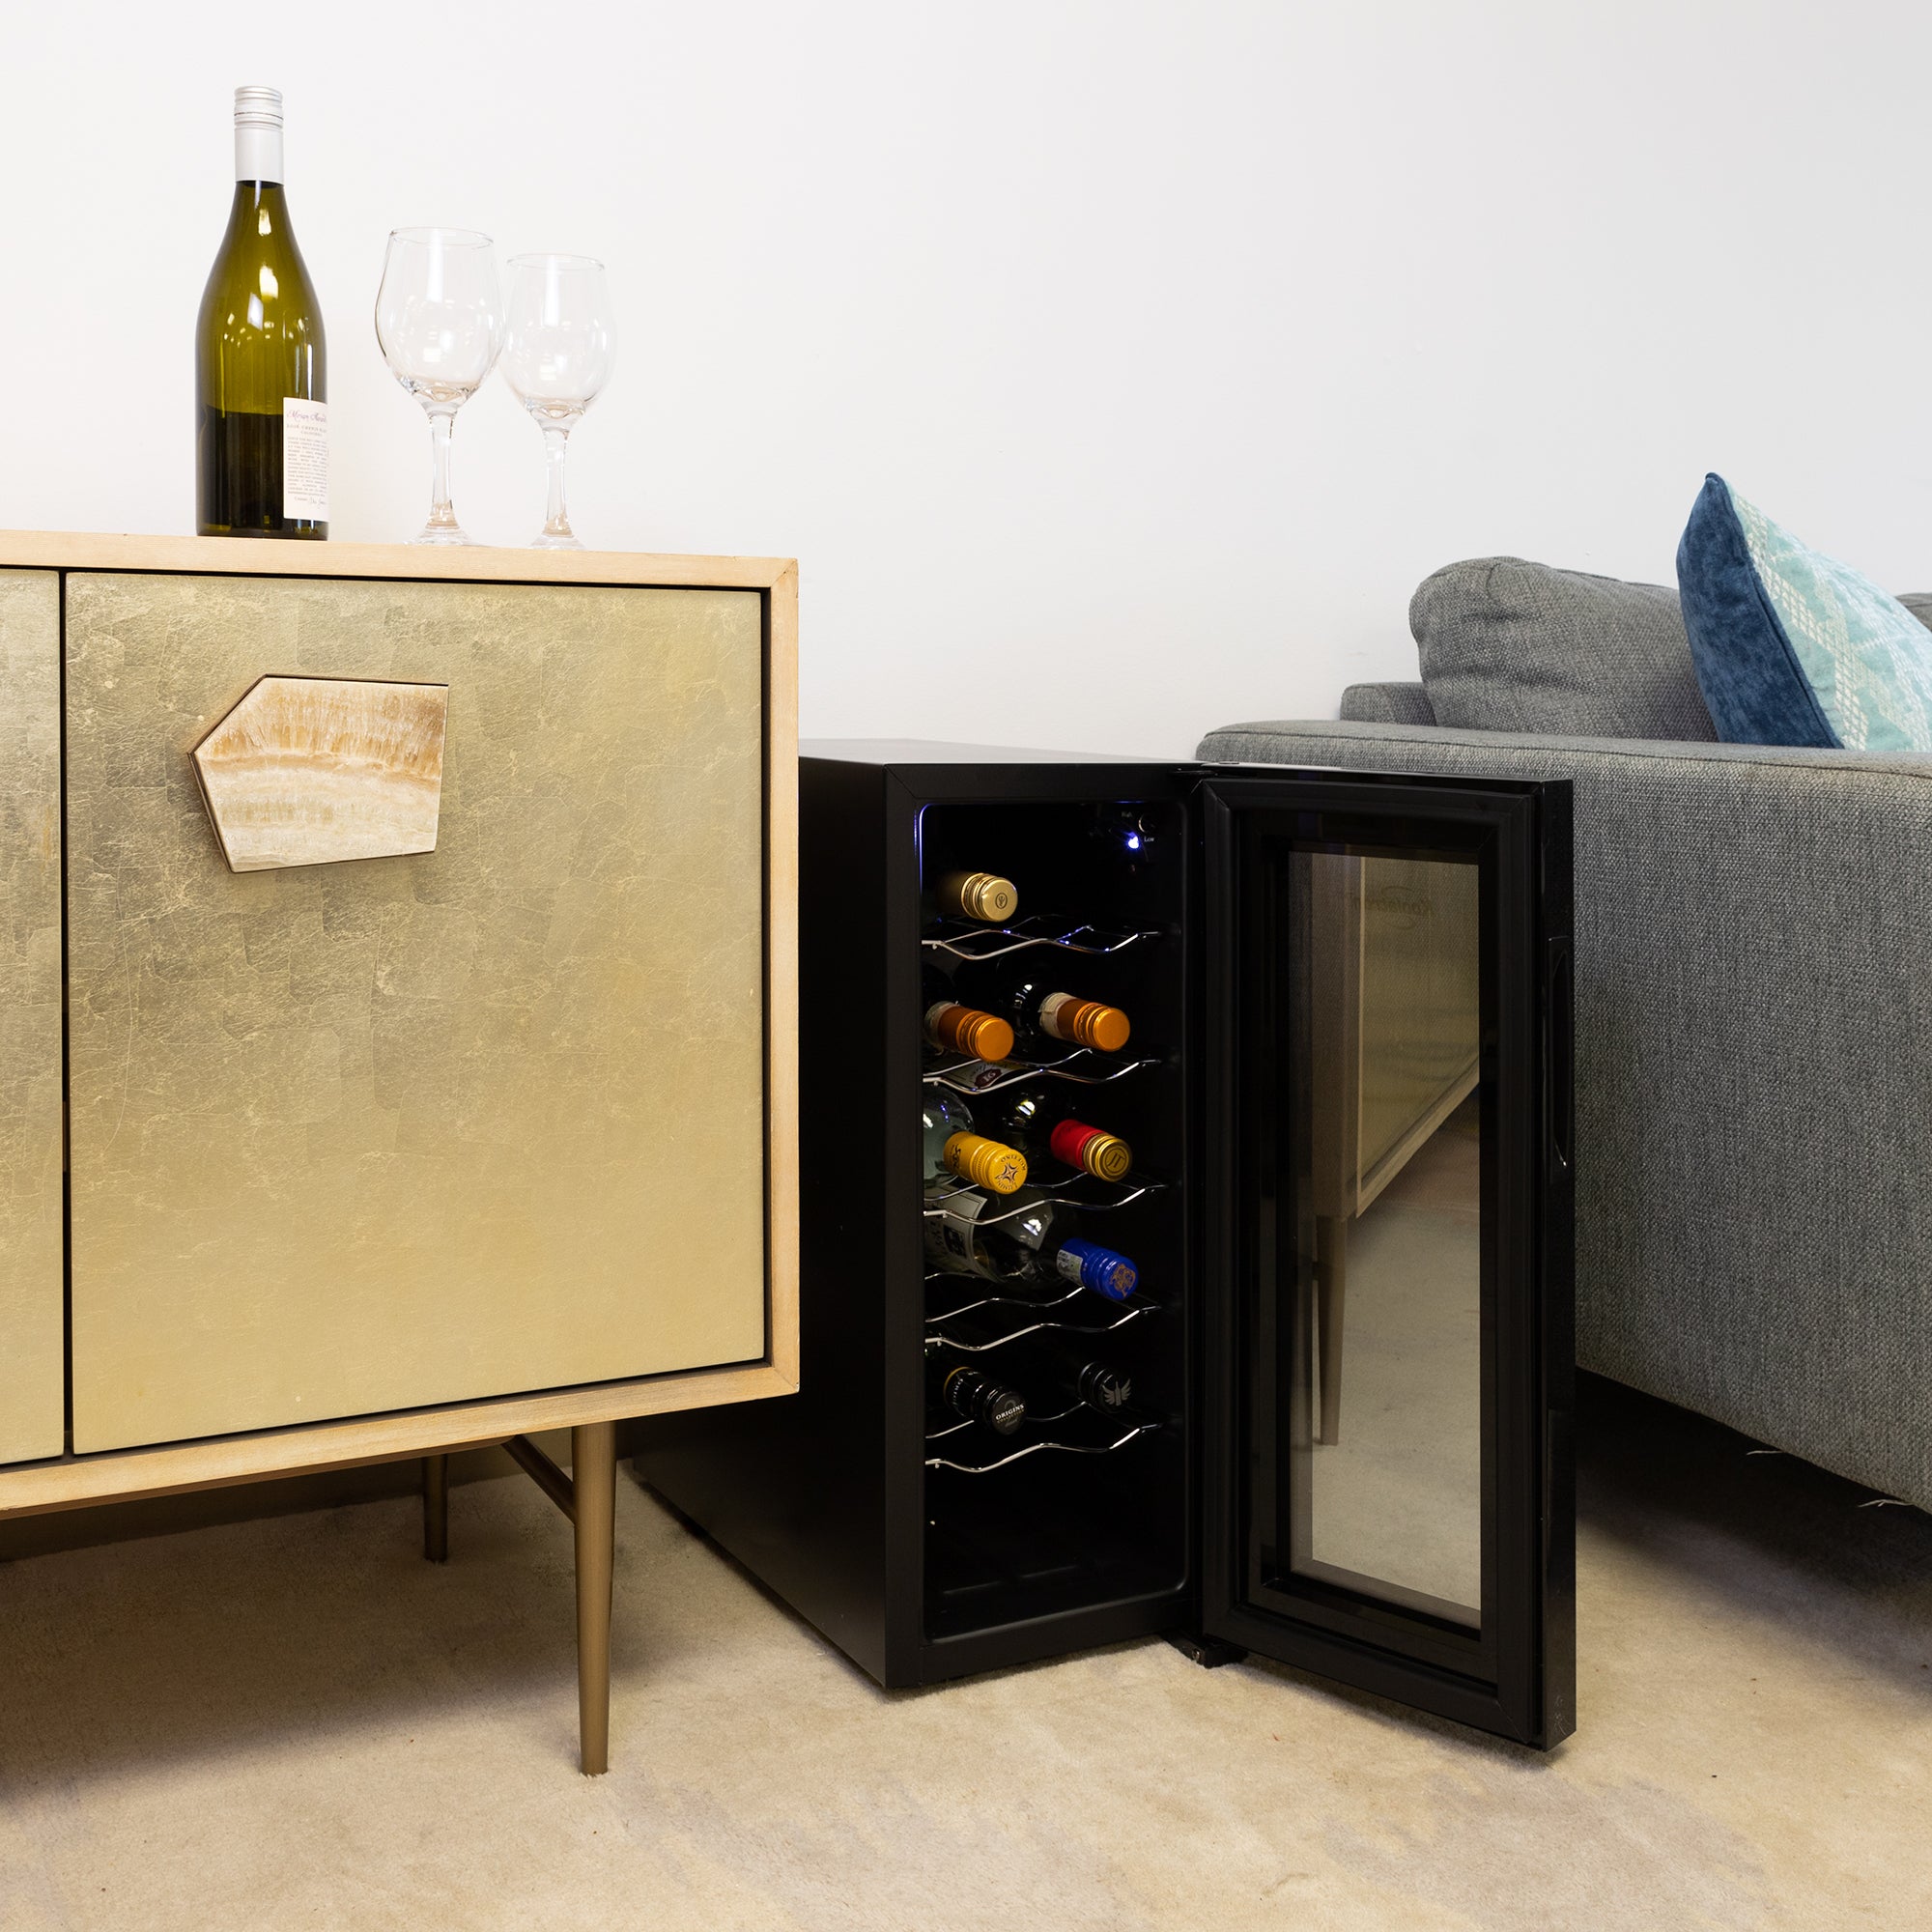 Koolatron 12 bottle wine cooler, open and filled with bottles of wine, set up on the floor between a gray sofa and a gold-coloured sideboard with a bottle of wine and one glass beside it